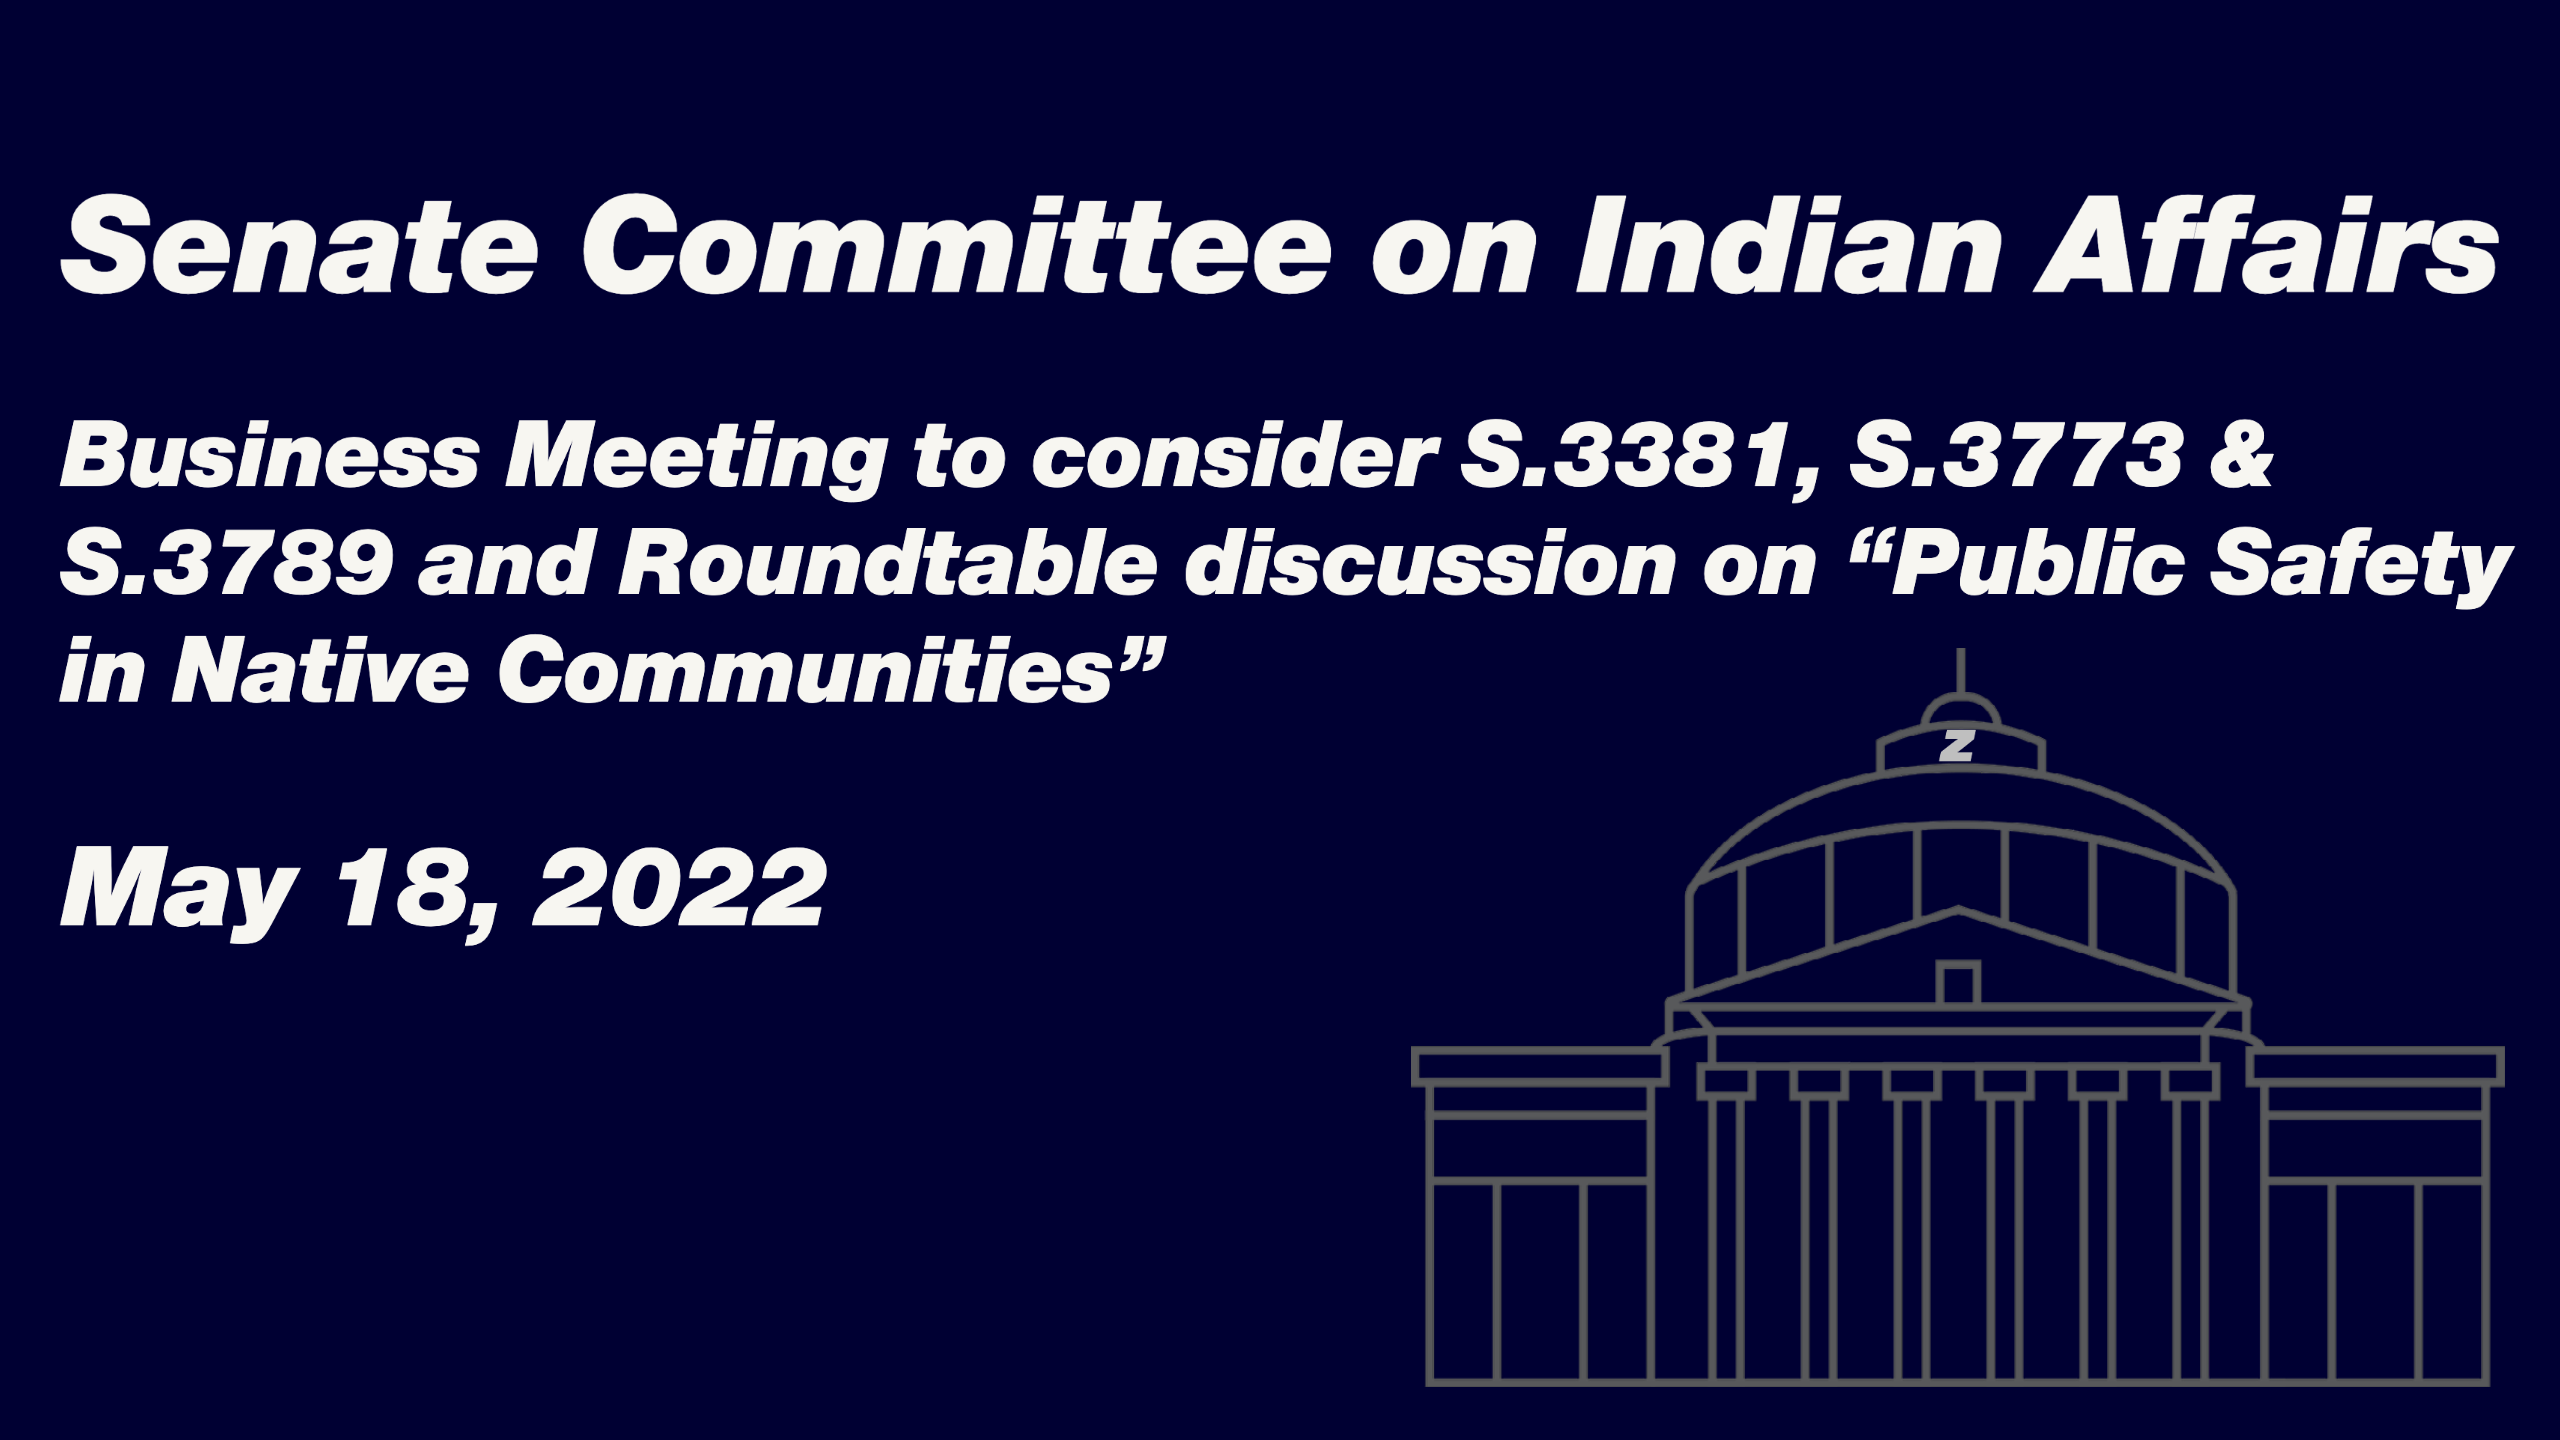 Senate Committee on Indian Affairs Business Meeting to consider S.3381, S.3773 & S.3789 and Roundtable discussion on “Public Safety in Native Communities”